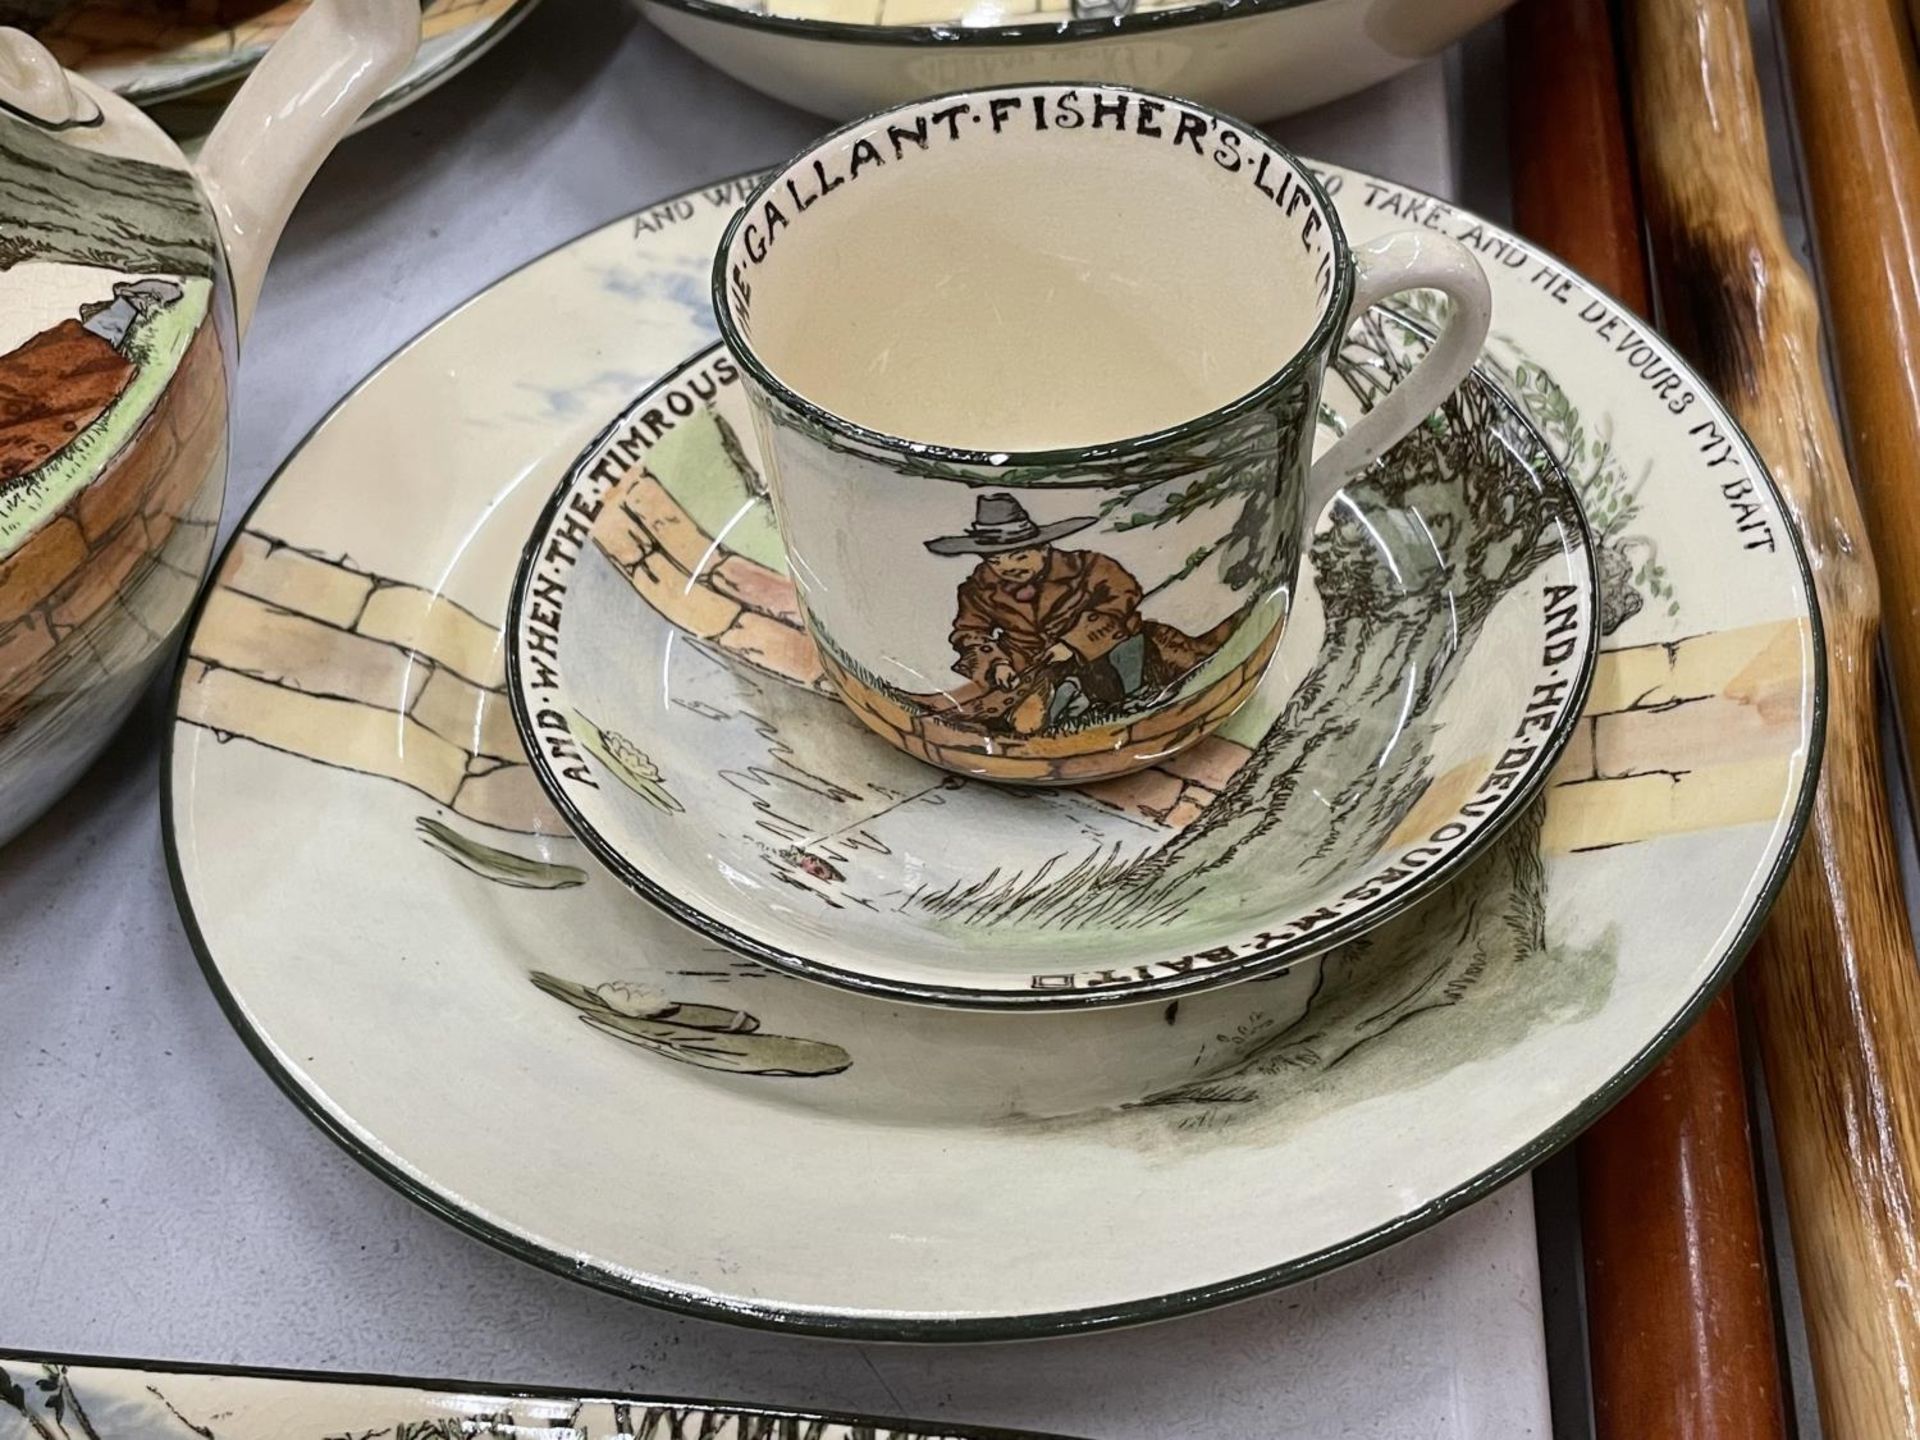 A QUANTITY OF ROYAL DOULTON 'THE GALLANT FISHERS' SERIES WARE TO INCLUDE PLATES, BOWLS, TEAPOT, CUPS - Image 3 of 7